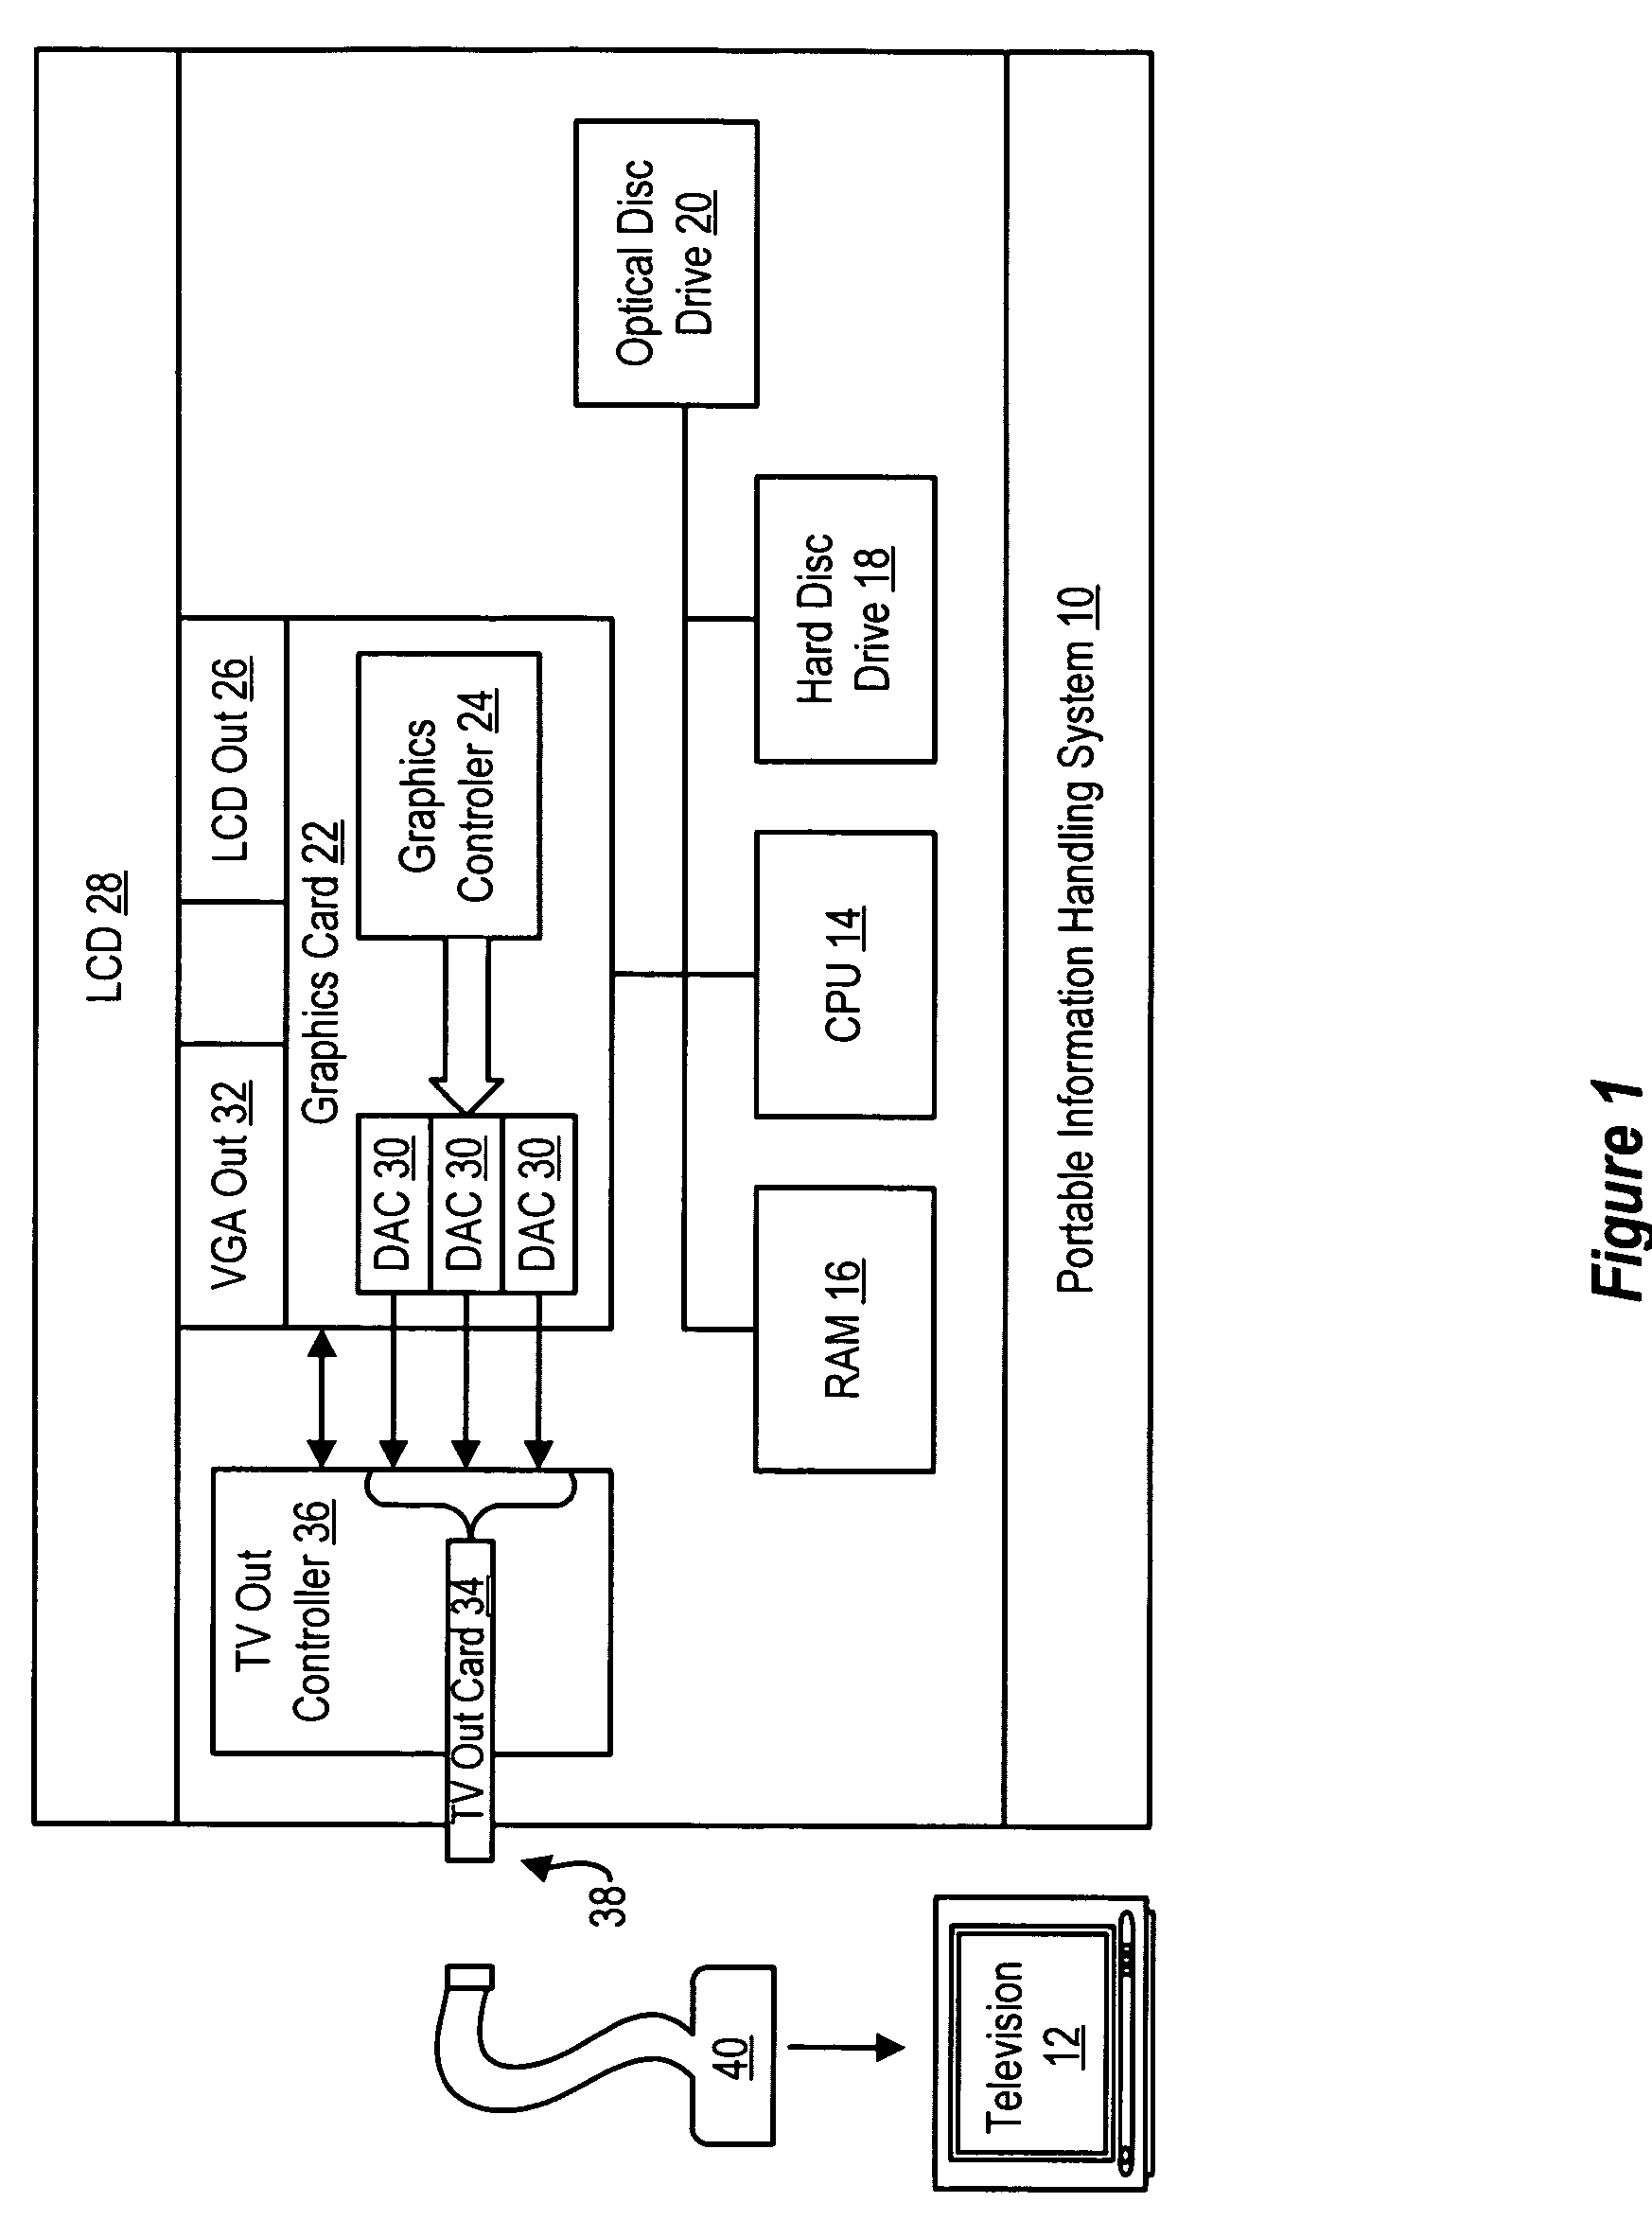 System and method for multimode information handling system TV out cable connection